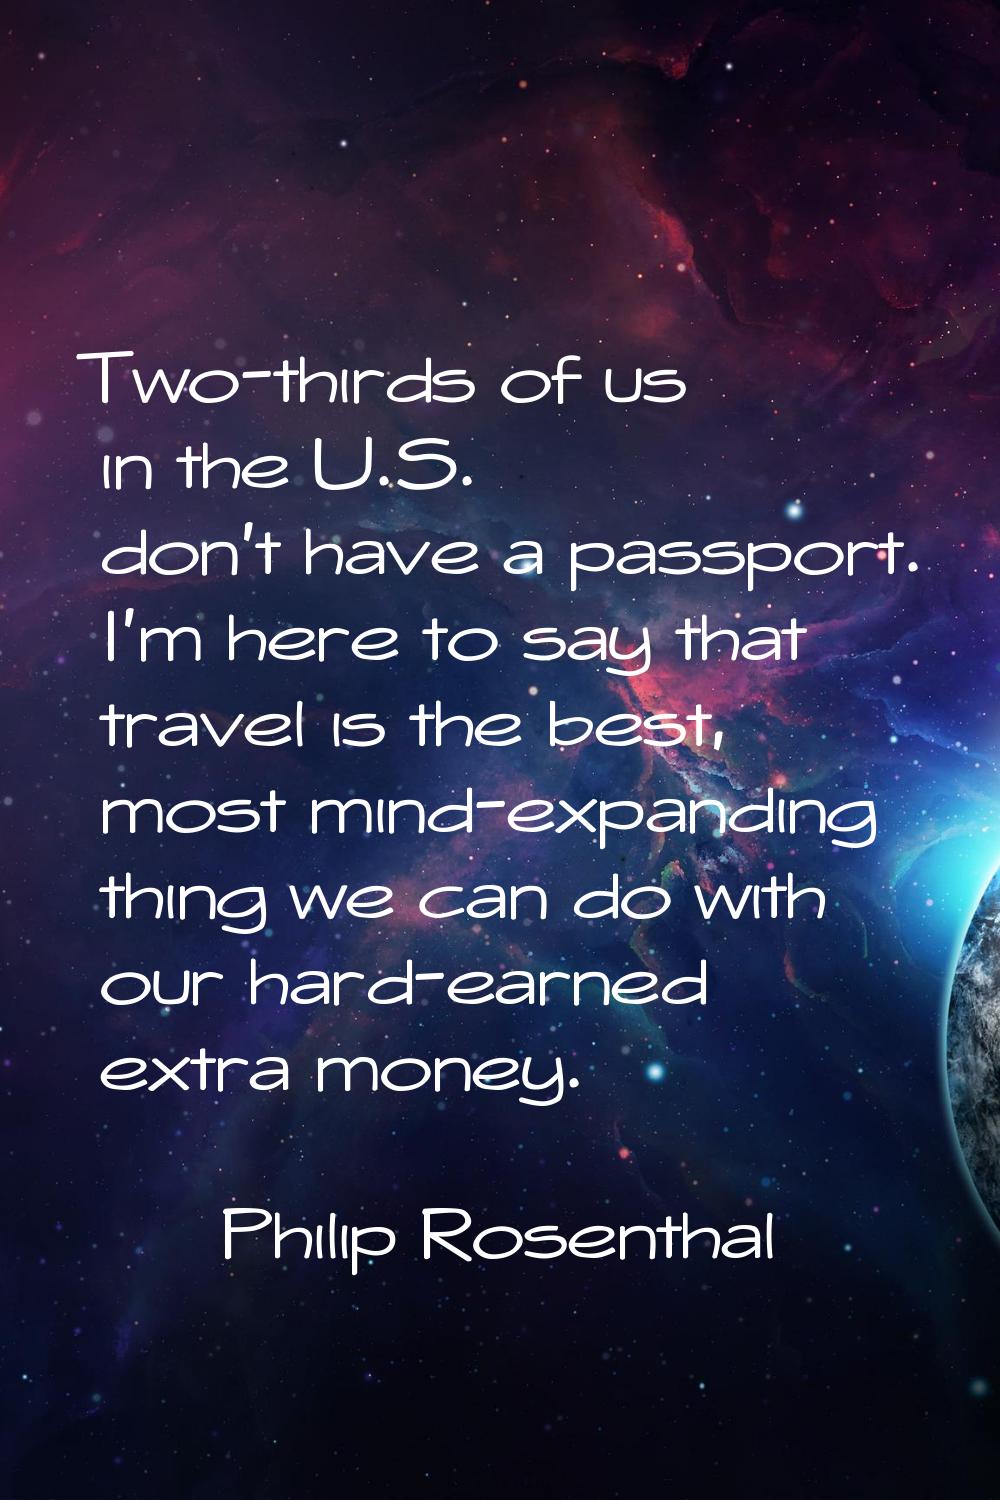 Two-thirds of us in the U.S. don't have a passport. I'm here to say that travel is the best, most m